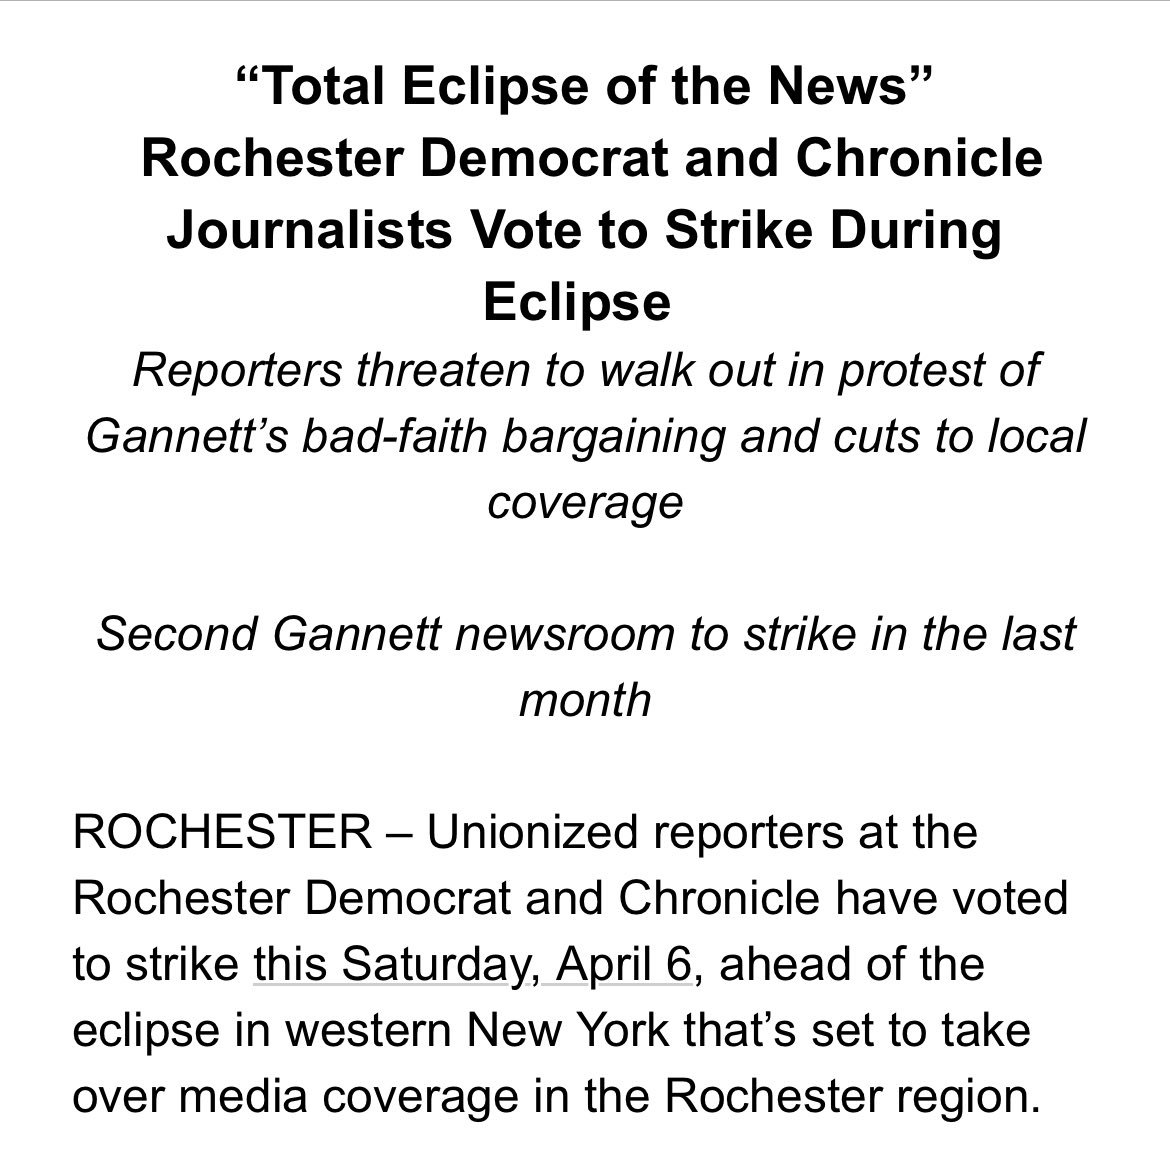 It’s an exciting day for journalists at the D&C. Yesterday we voted unanimously to strike starting Saturday unless @Gannett agrees to a fair contract by then. This much is for certain: whether it’s this week, next week or some time after that, we’re going to get a fair contract.